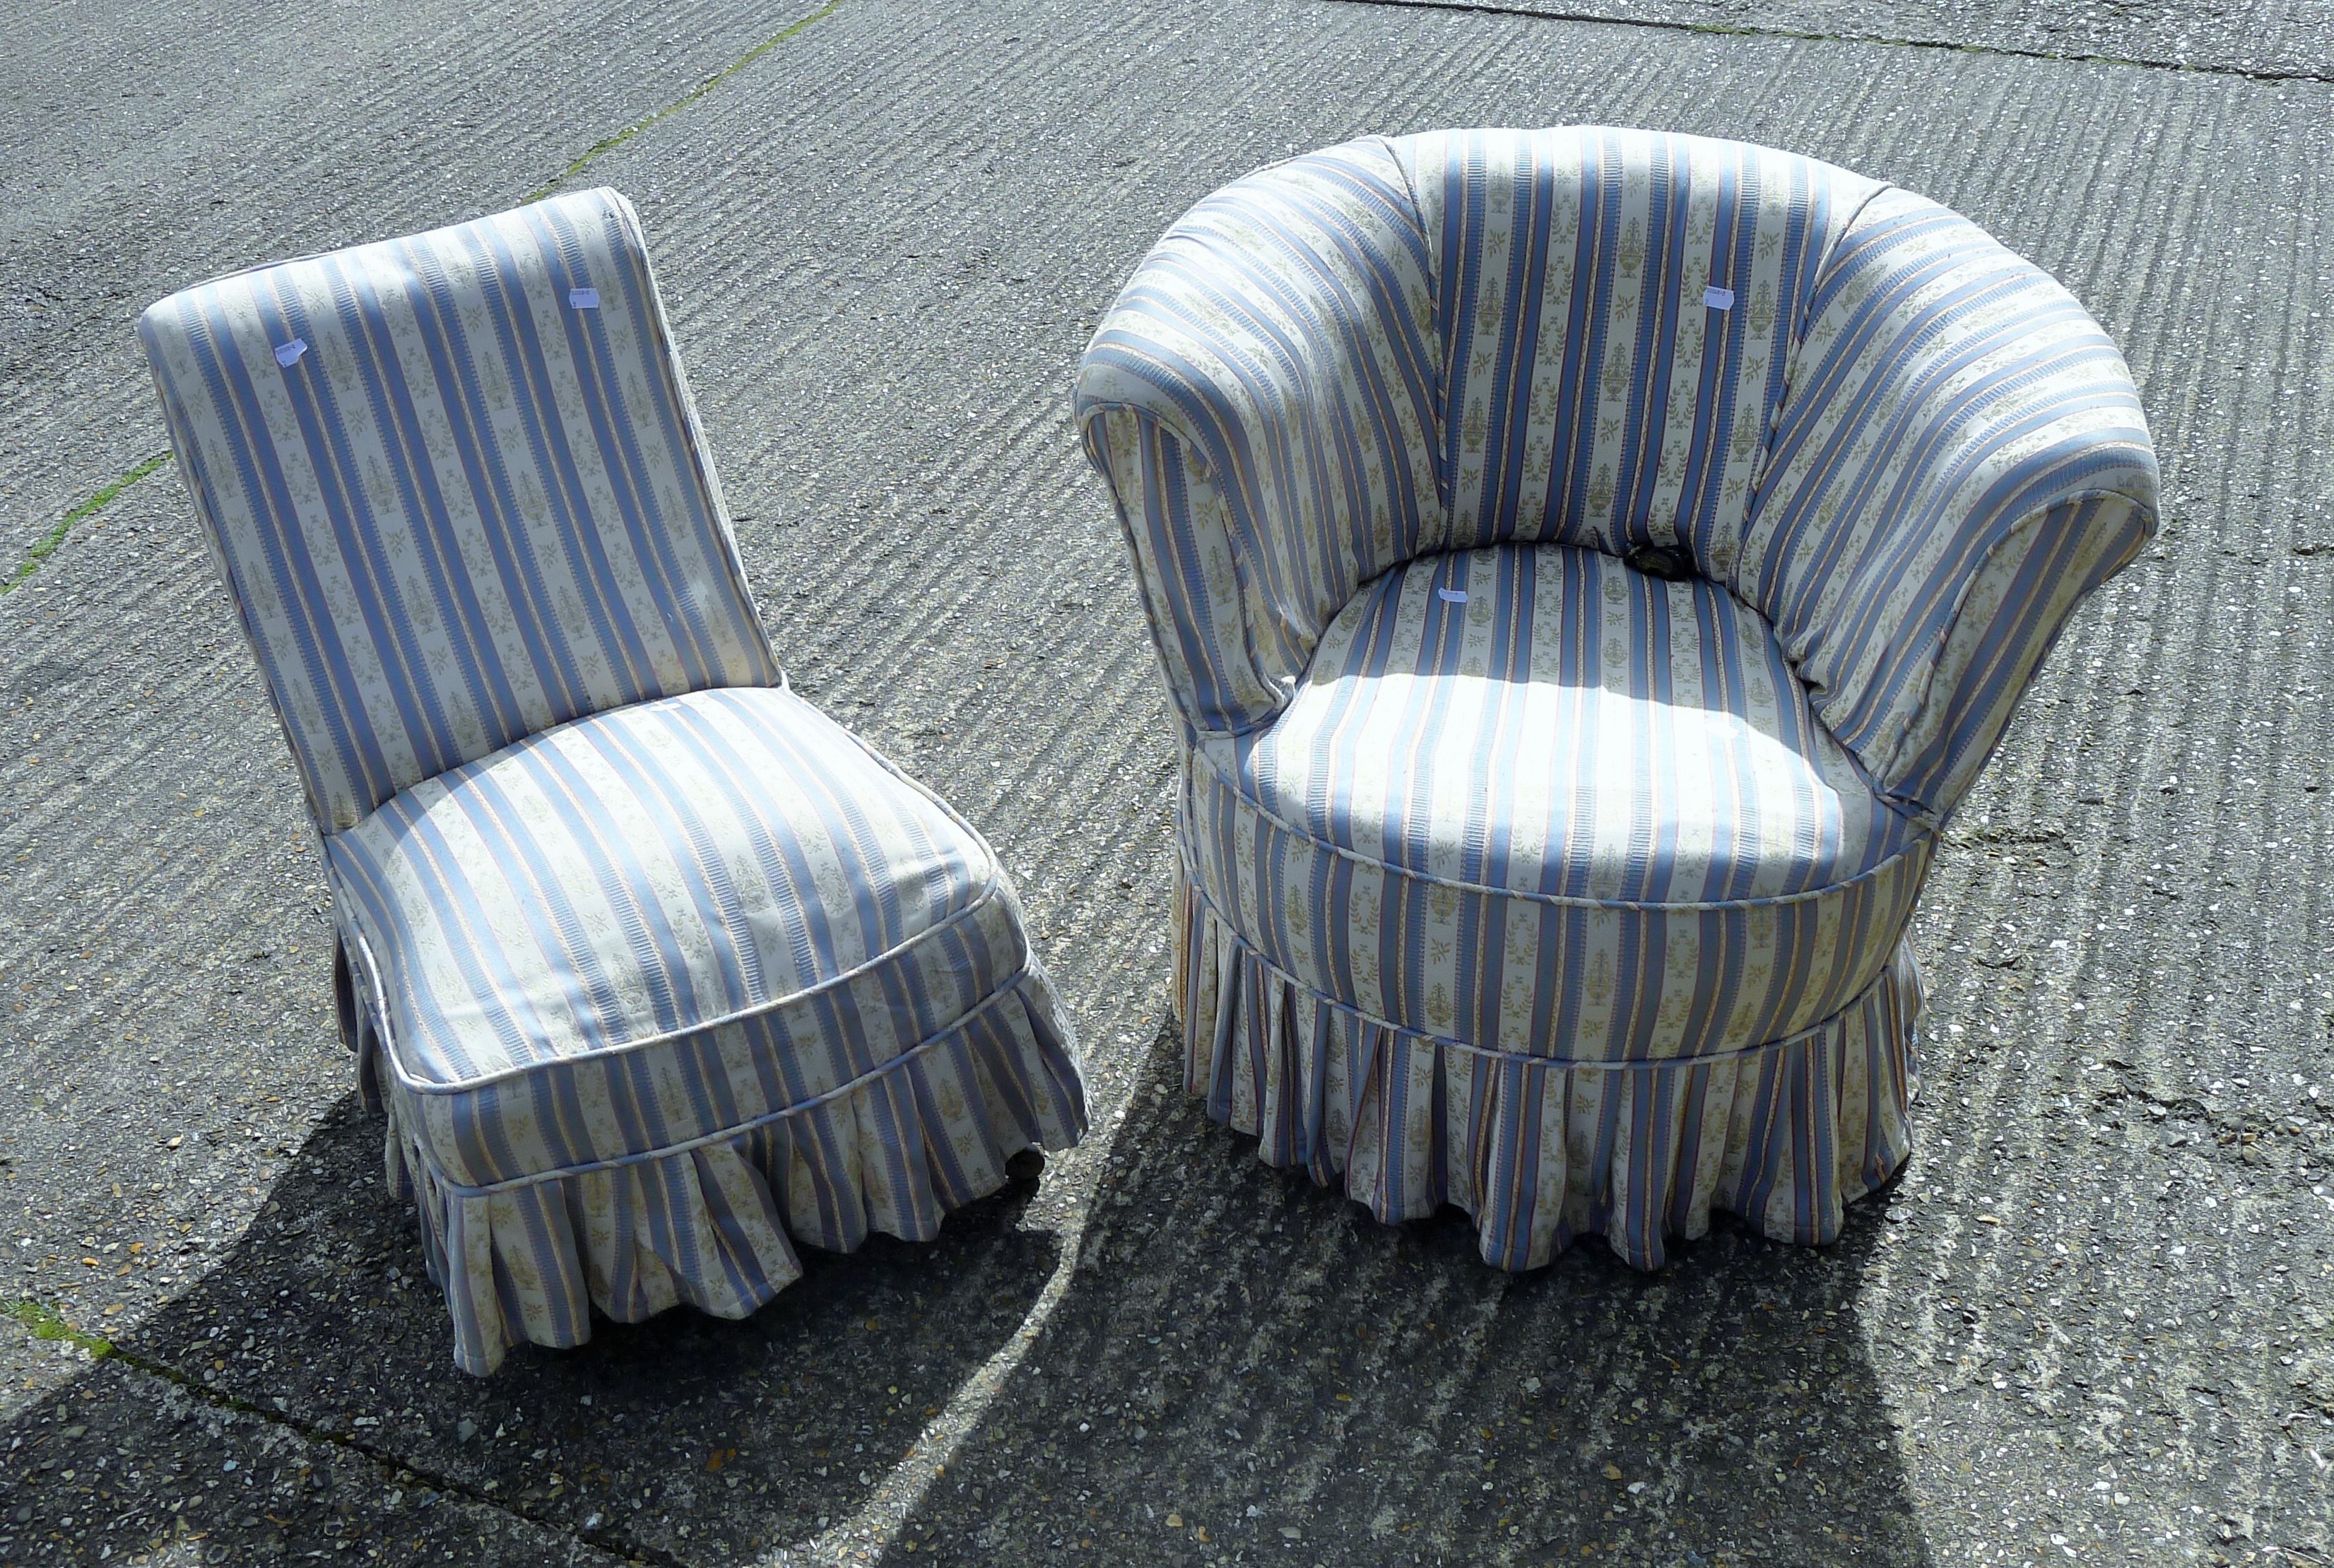 A Victorian tub chair and a Victorian nursing chair with blue and white striped loose upholstery.